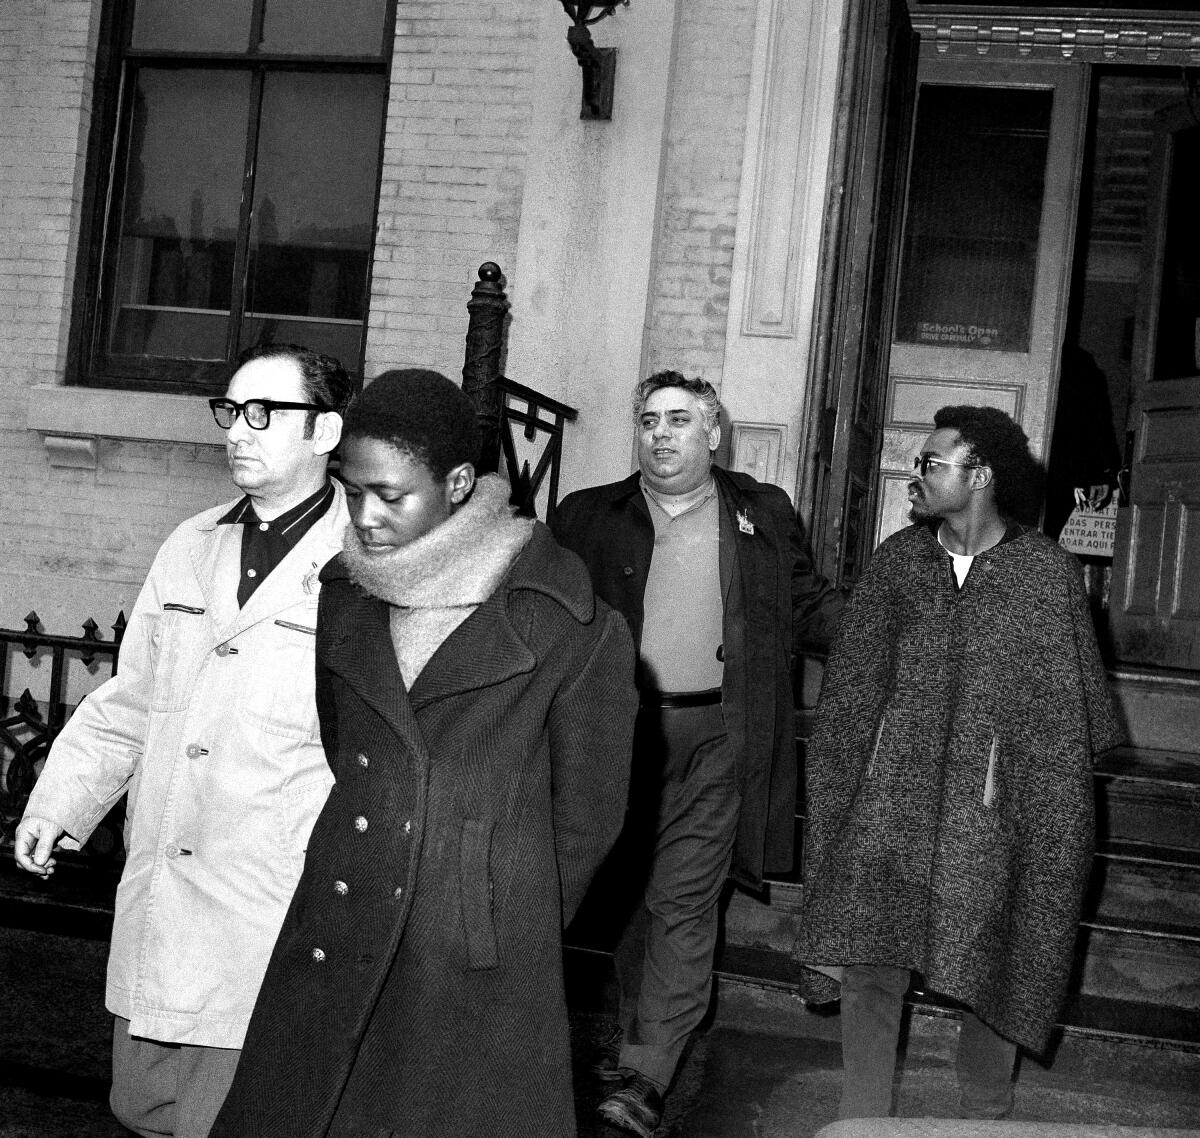 Afeni Shakur and her husband, Lumumba Shakur, are escorted from an NYPD station 1969